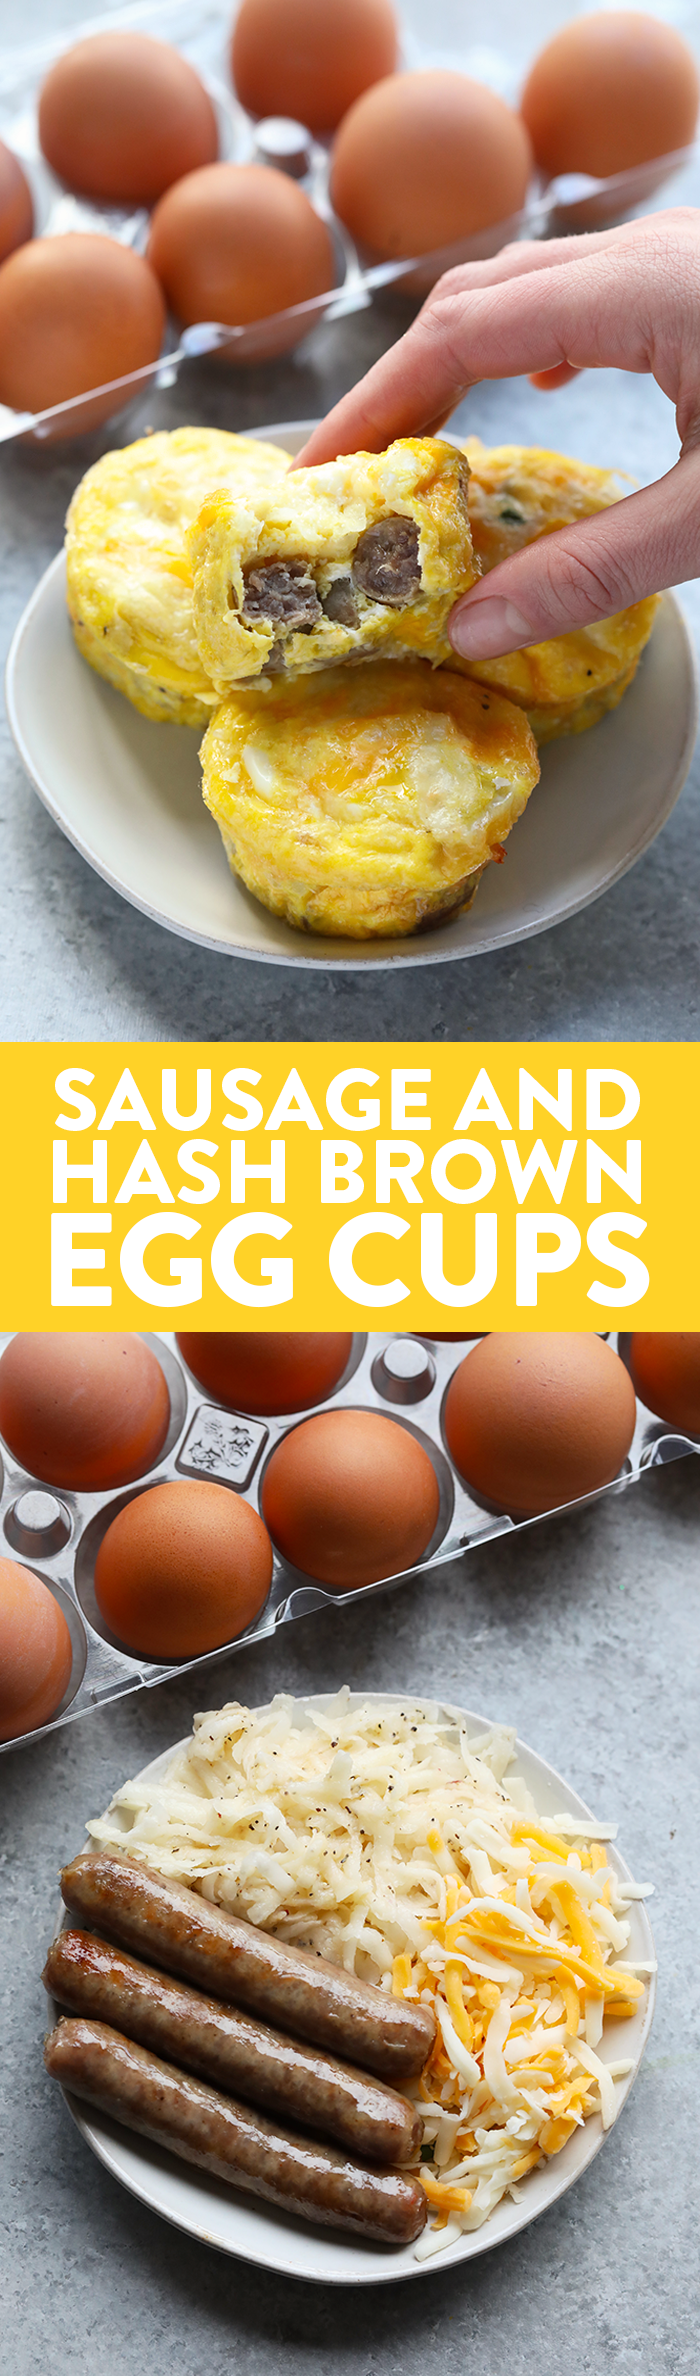 These All American Egg Cups are perfect for picky eaters. They're made with homemade hash browns, breakfast sausage, and cheese! Pro tip: try subbing out the hash browns for shredded sweet potato! 